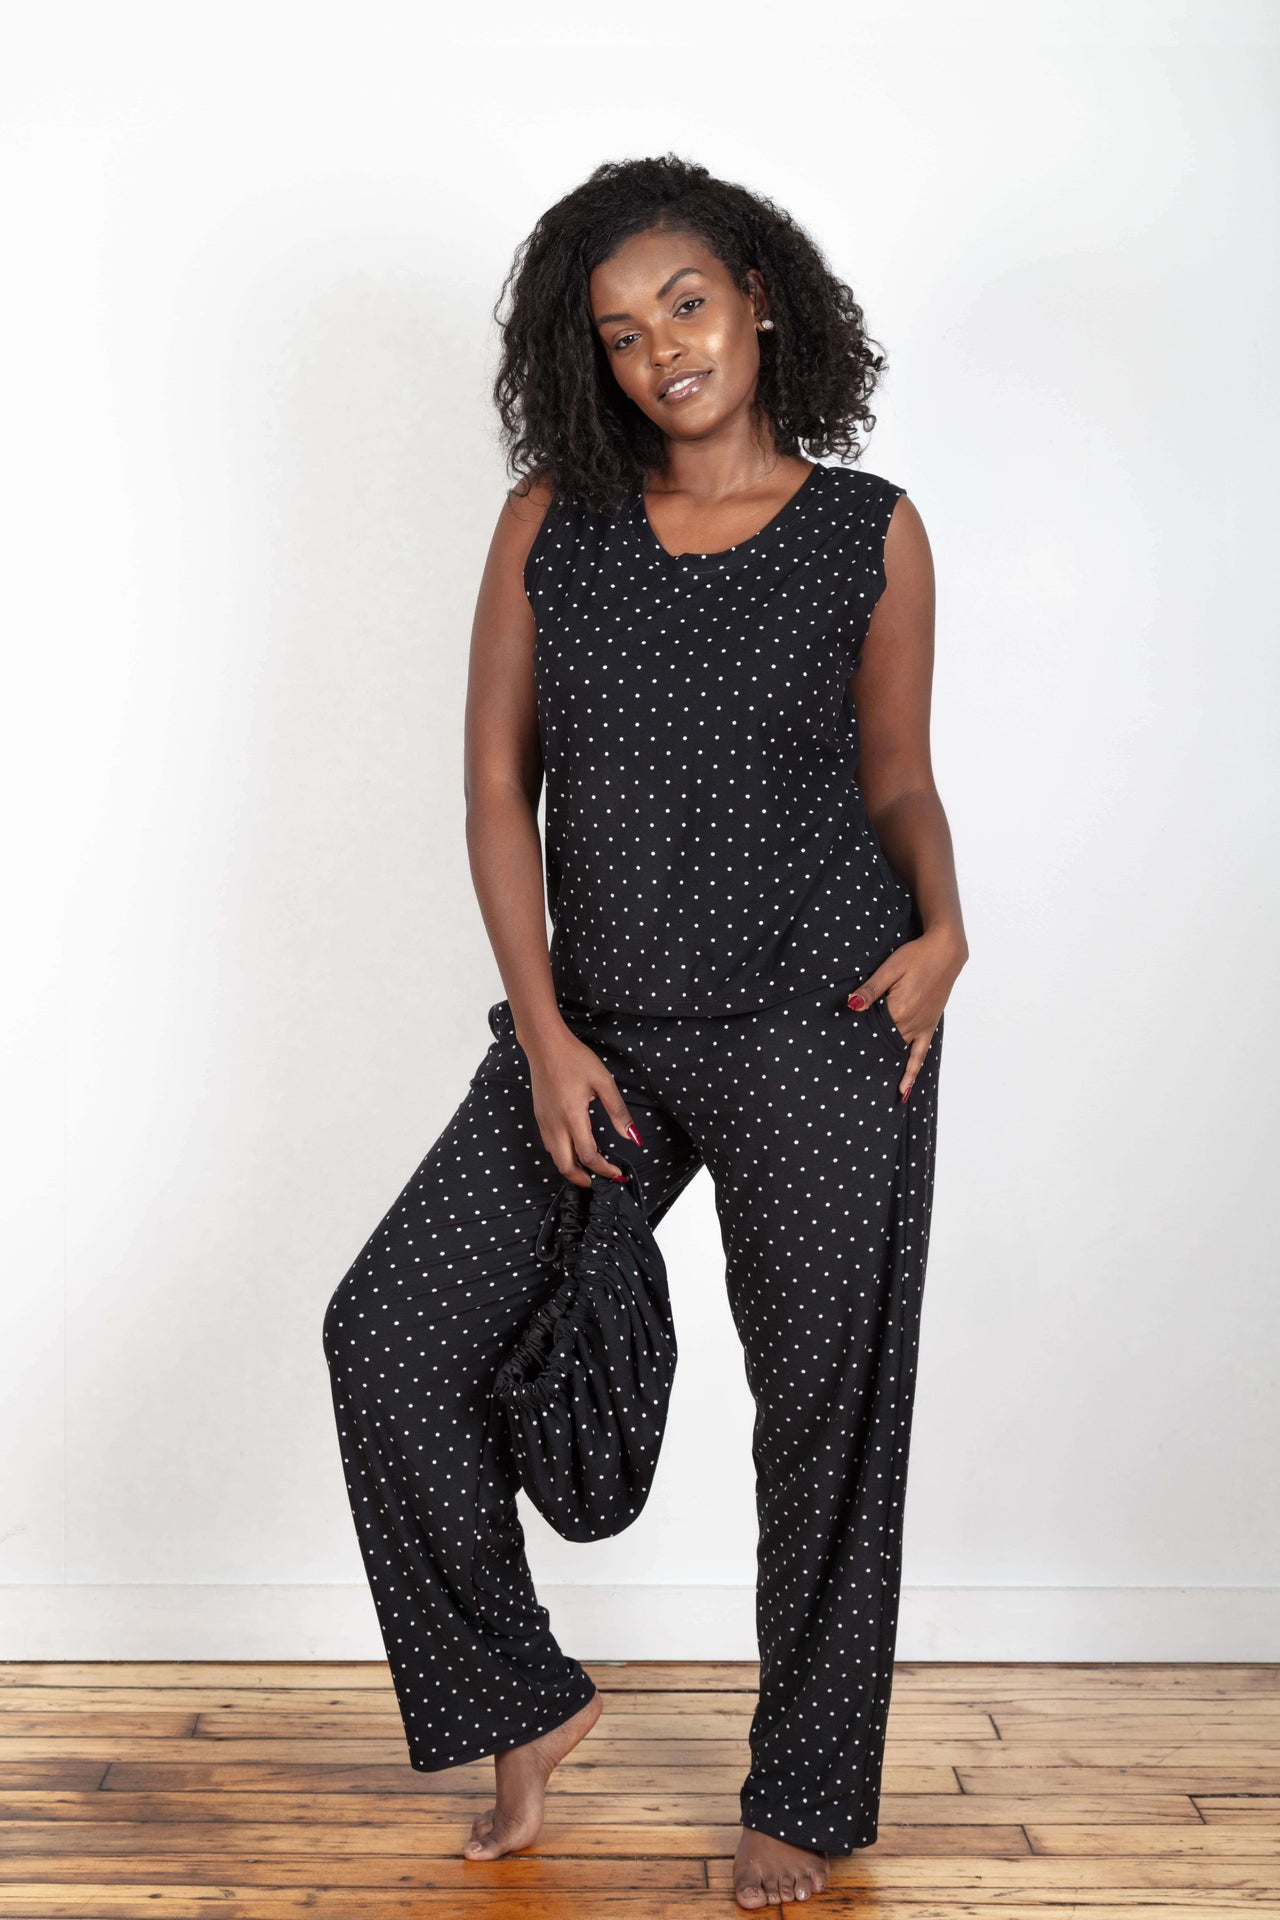 Soft and comfy Bamboo fabric, Black and White Polka Dots women's sleepwear/loungewear. Women's Pajama pants set with a Matching satin-lined bonnet.